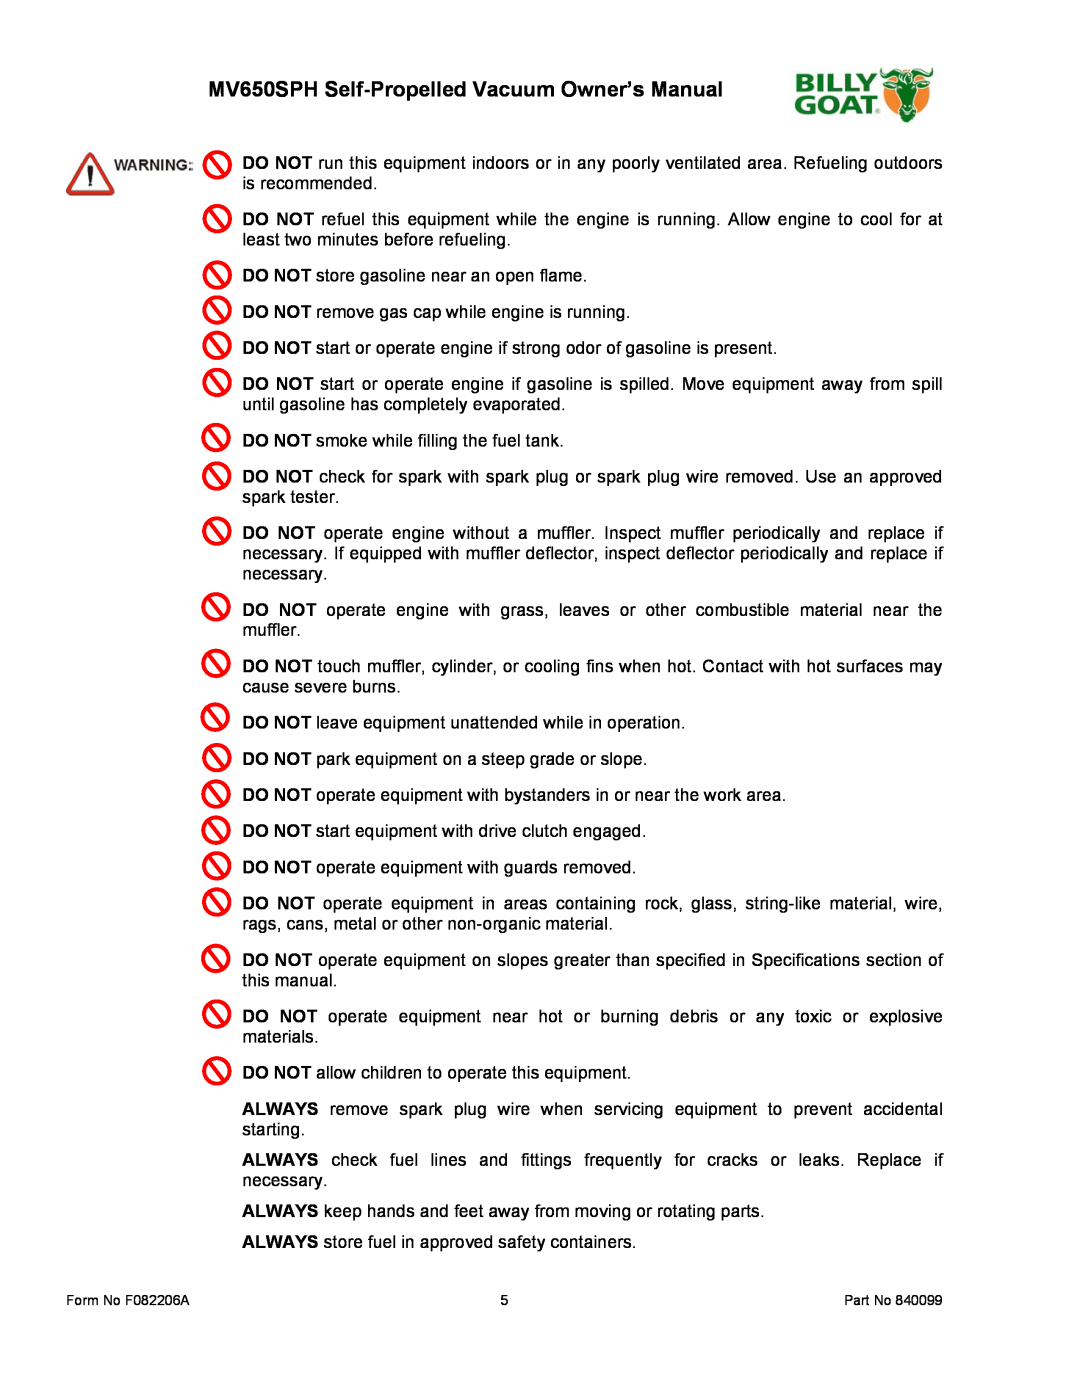 Billy Goat owner manual MV650SPH Self-Propelled Vacuum Owner’s Manual, DO NOT store gasoline near an open flame 